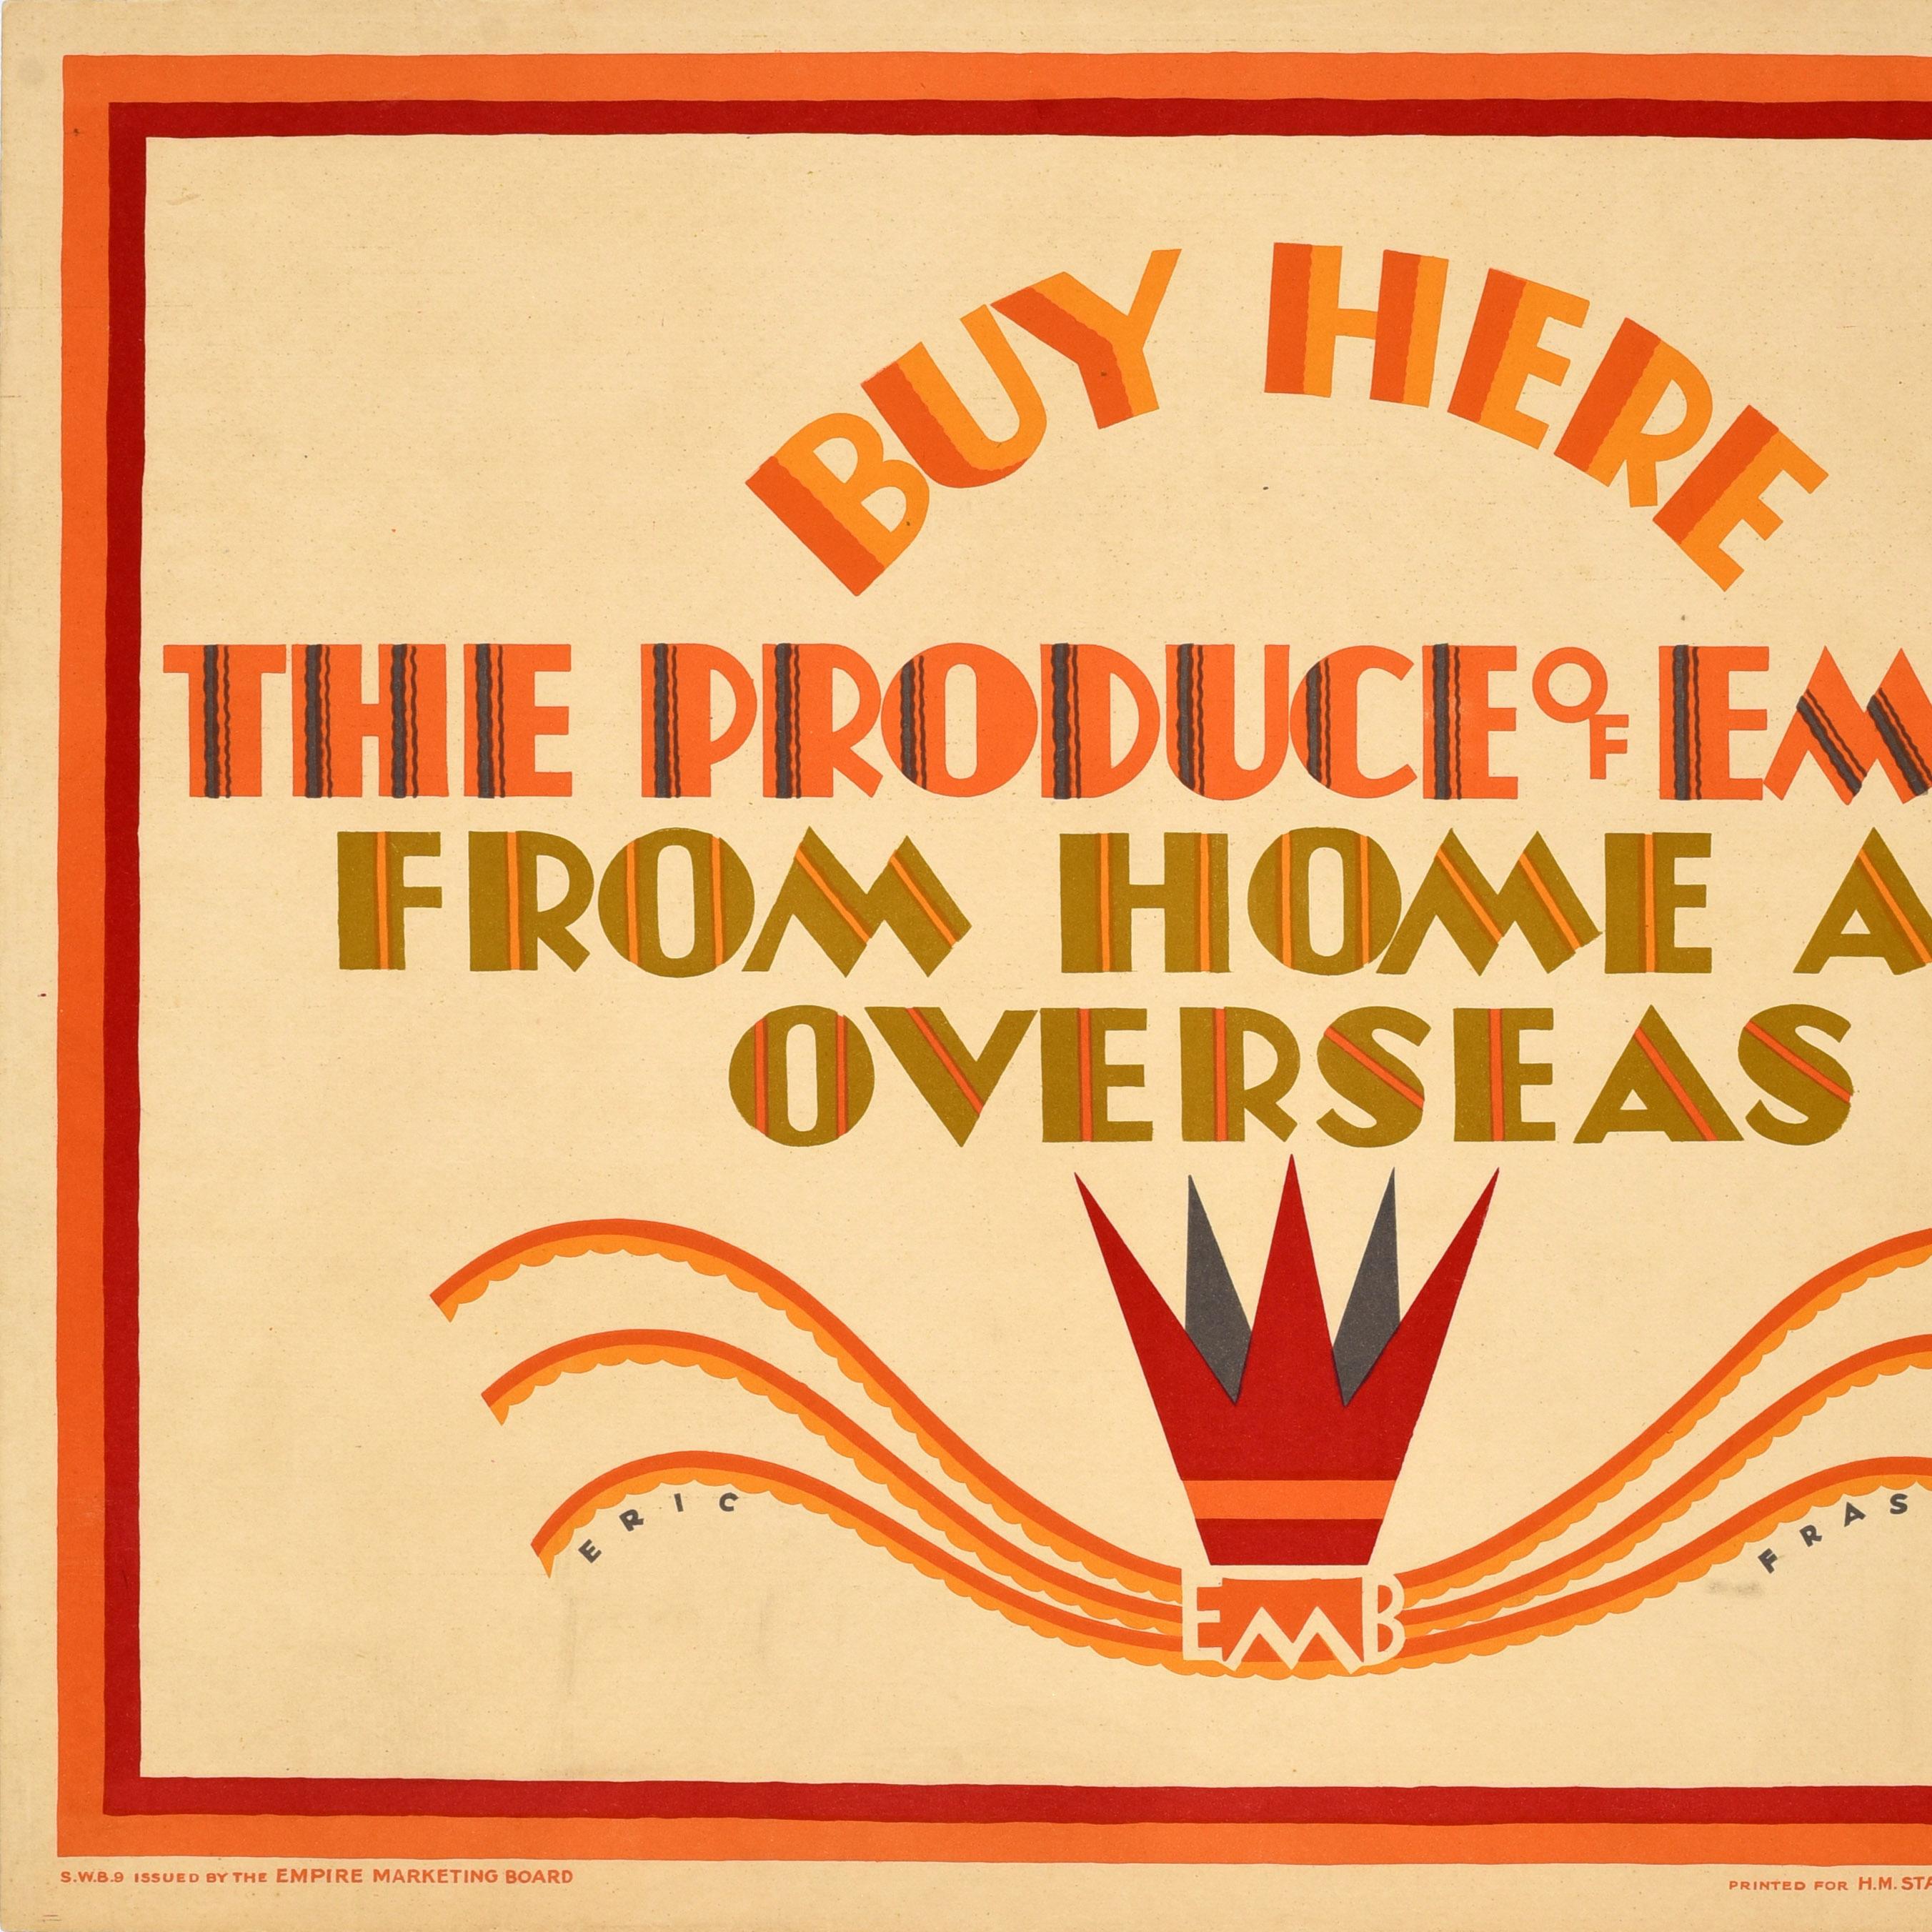 British Original Vintage Advertising Poster Buy Here Produce Of Empire Marketing Board For Sale